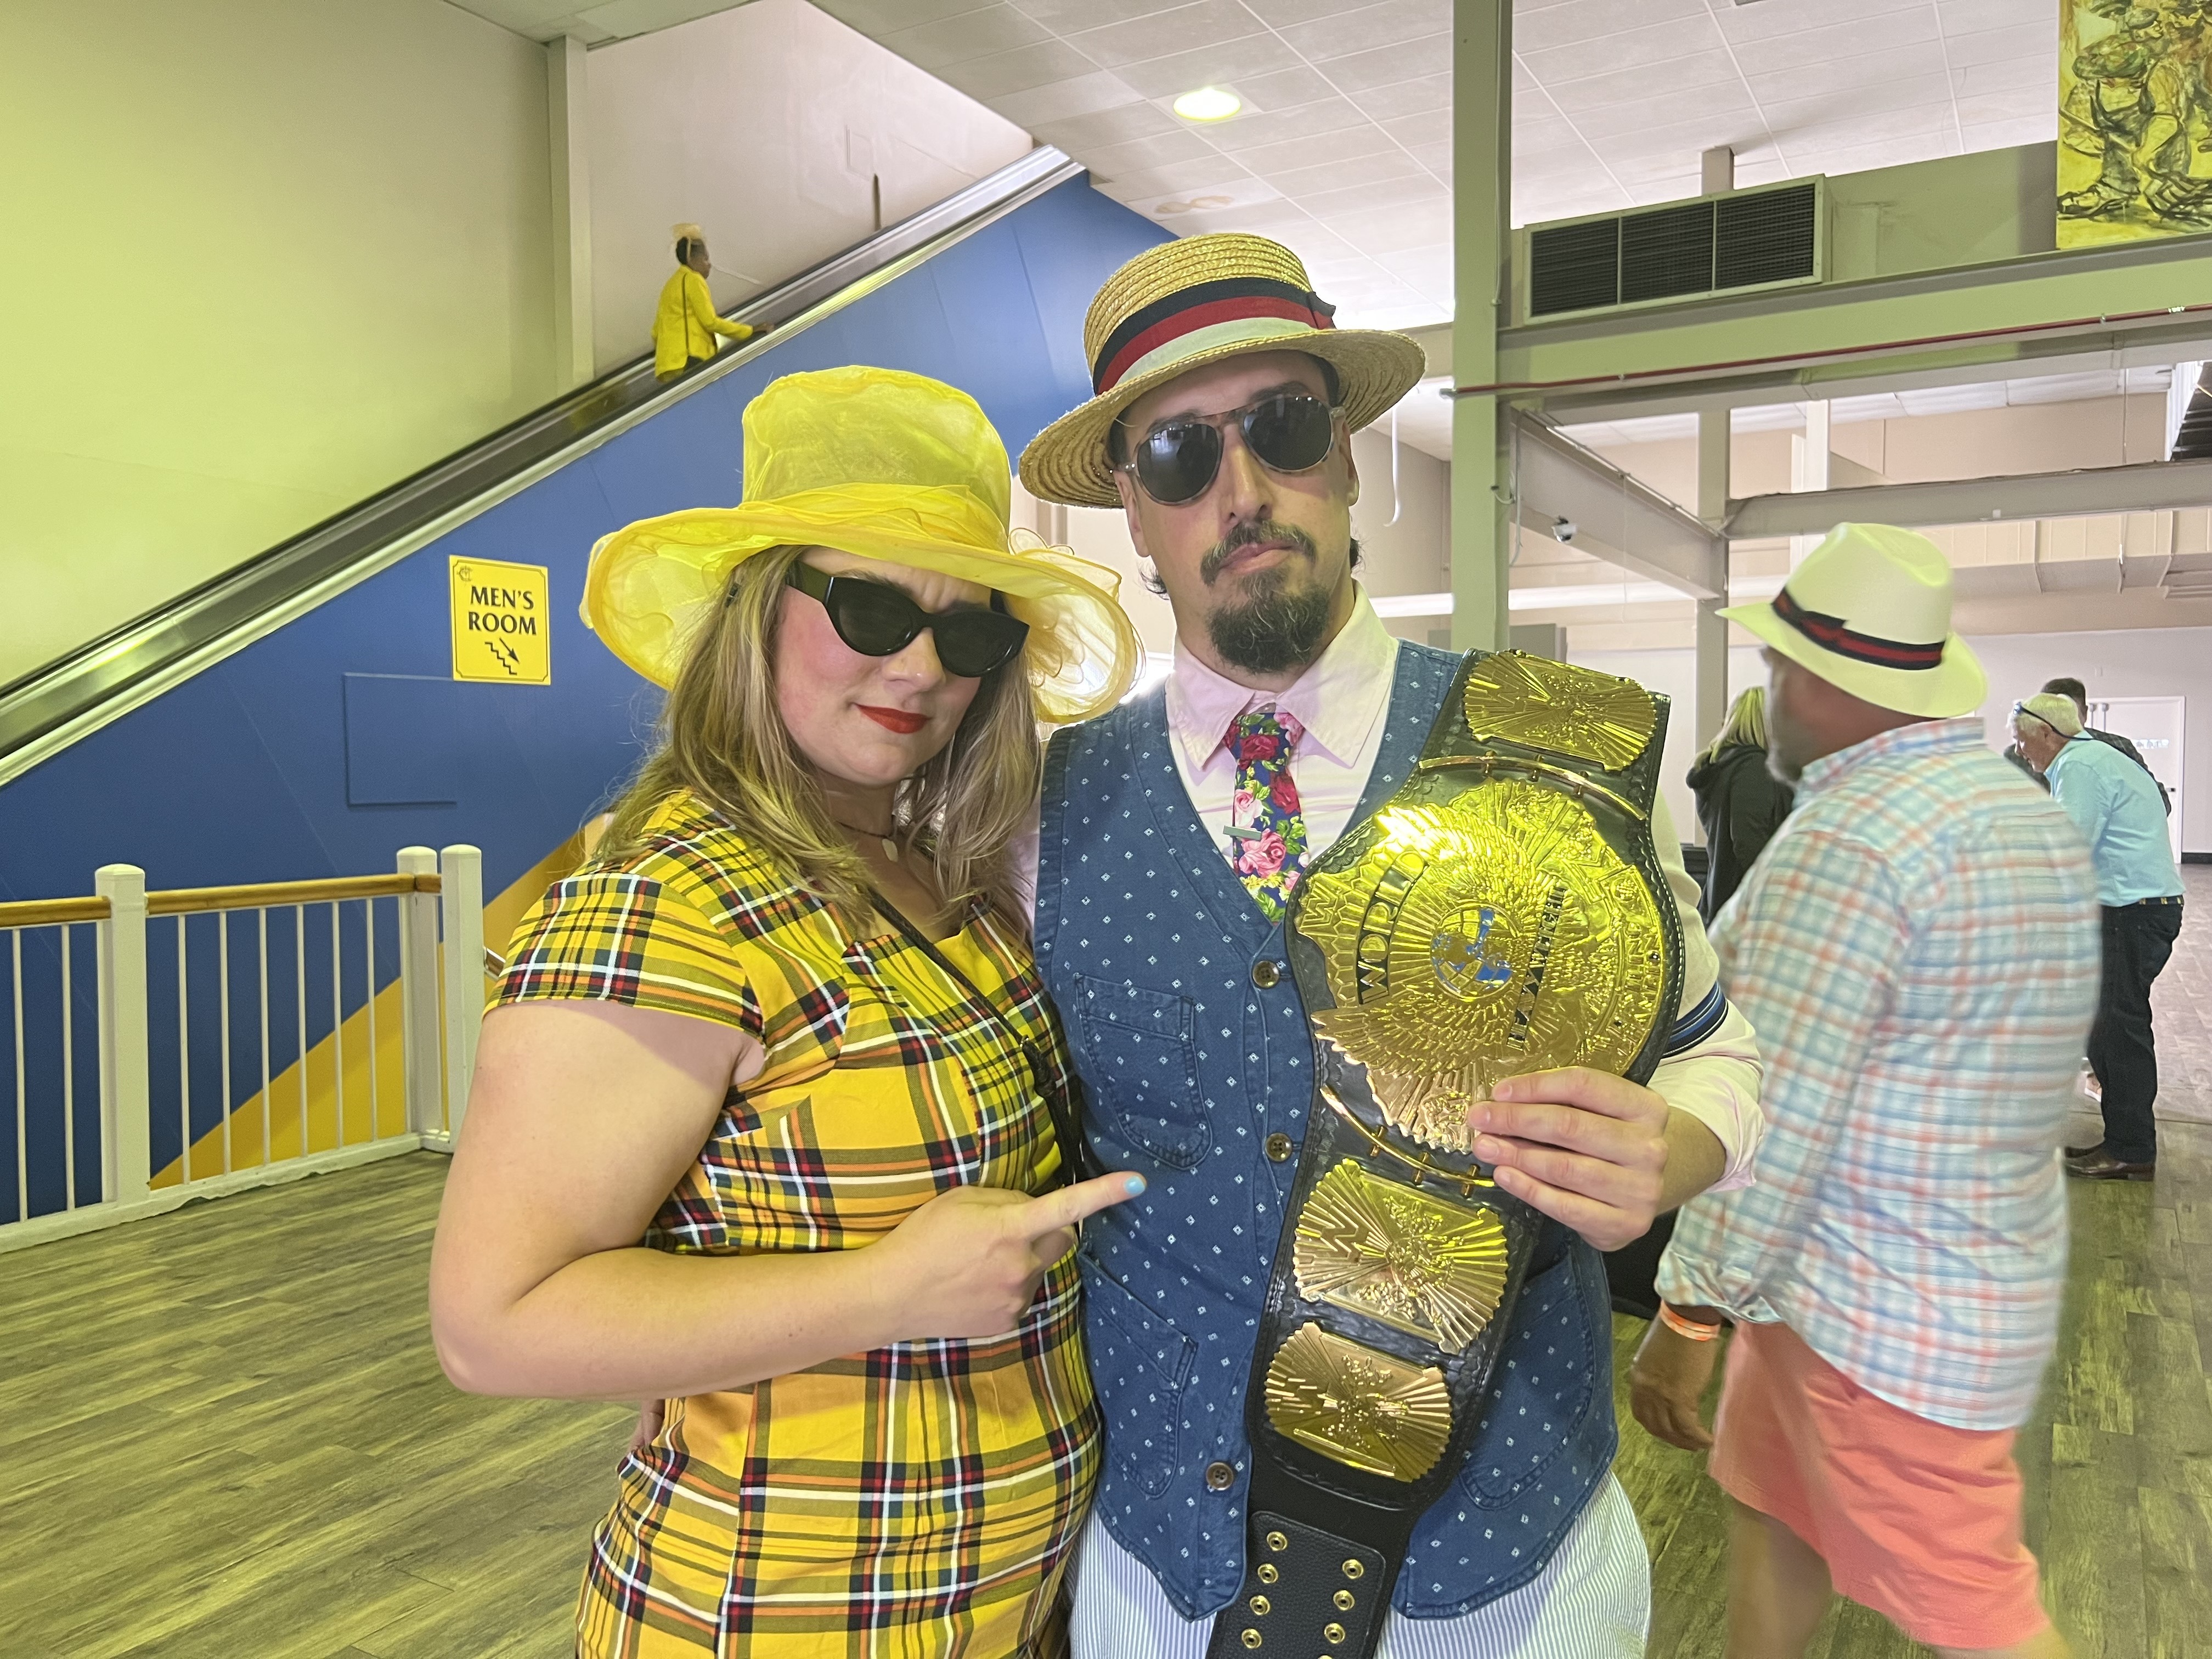 Two fans enjoy Preakness with a wrestling championship belt. (Cadence Quaranta/The Baltimore Banner)